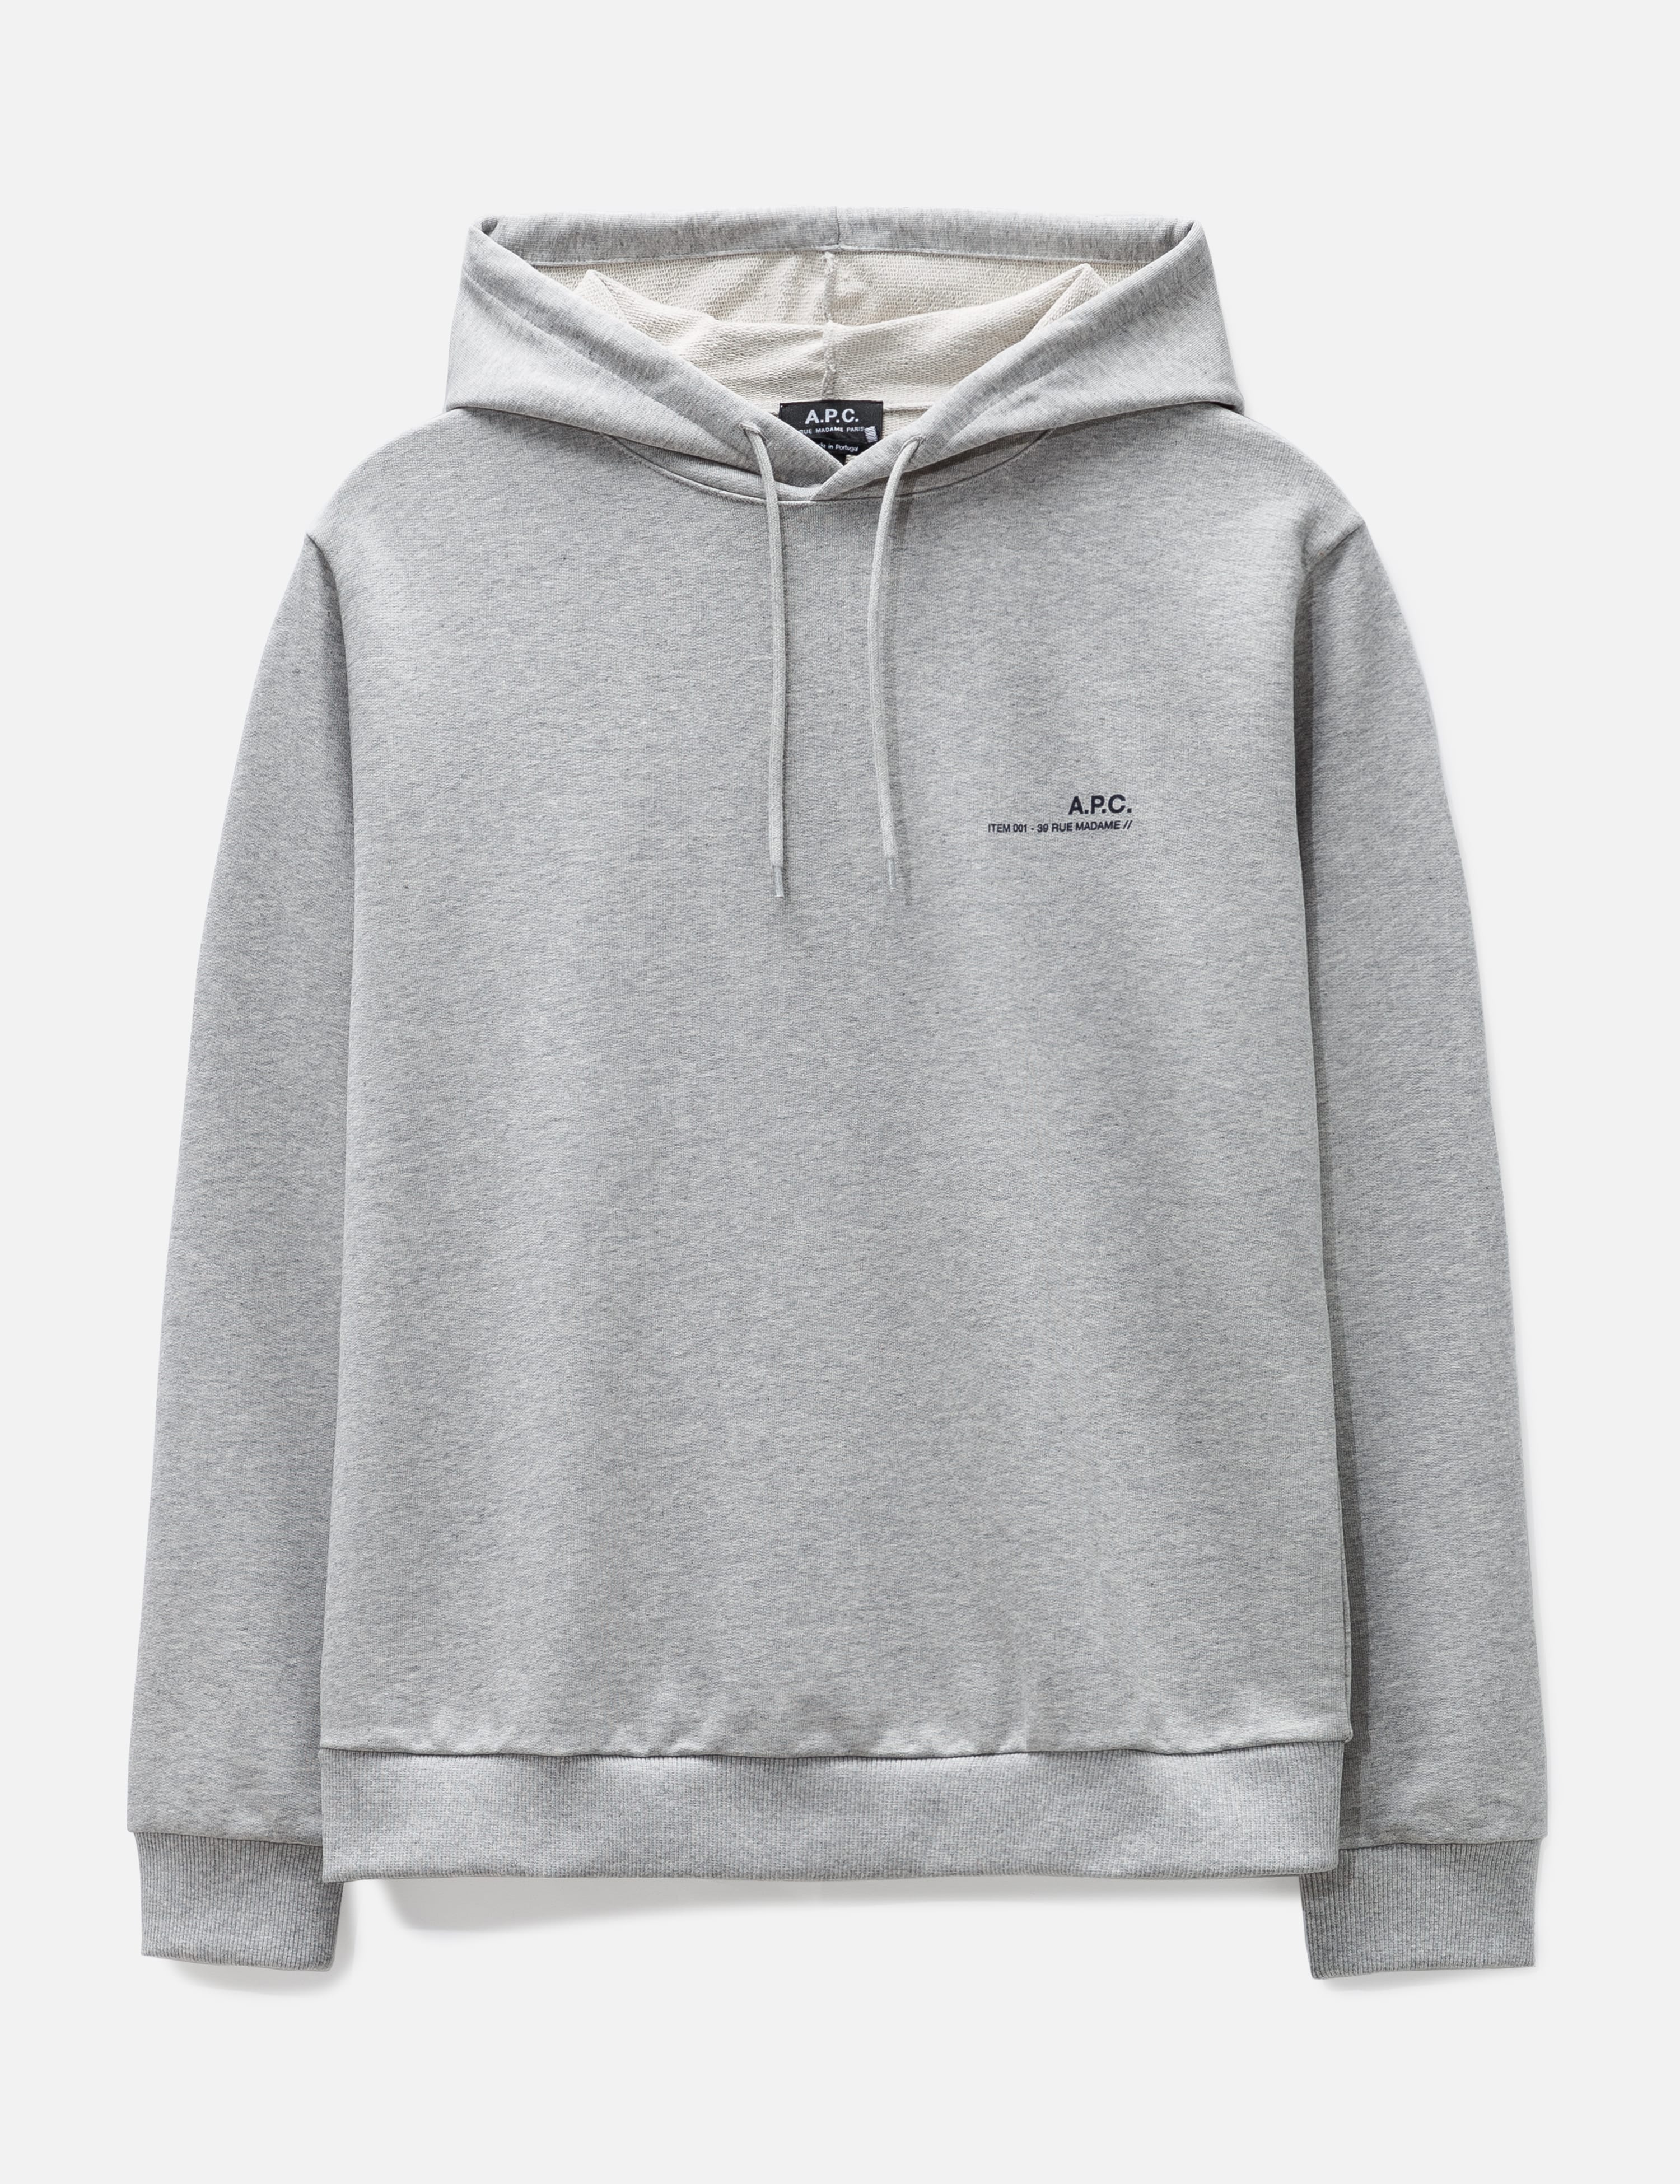 A.P.C. - Item H Hoodie | HBX - Globally Curated Fashion and